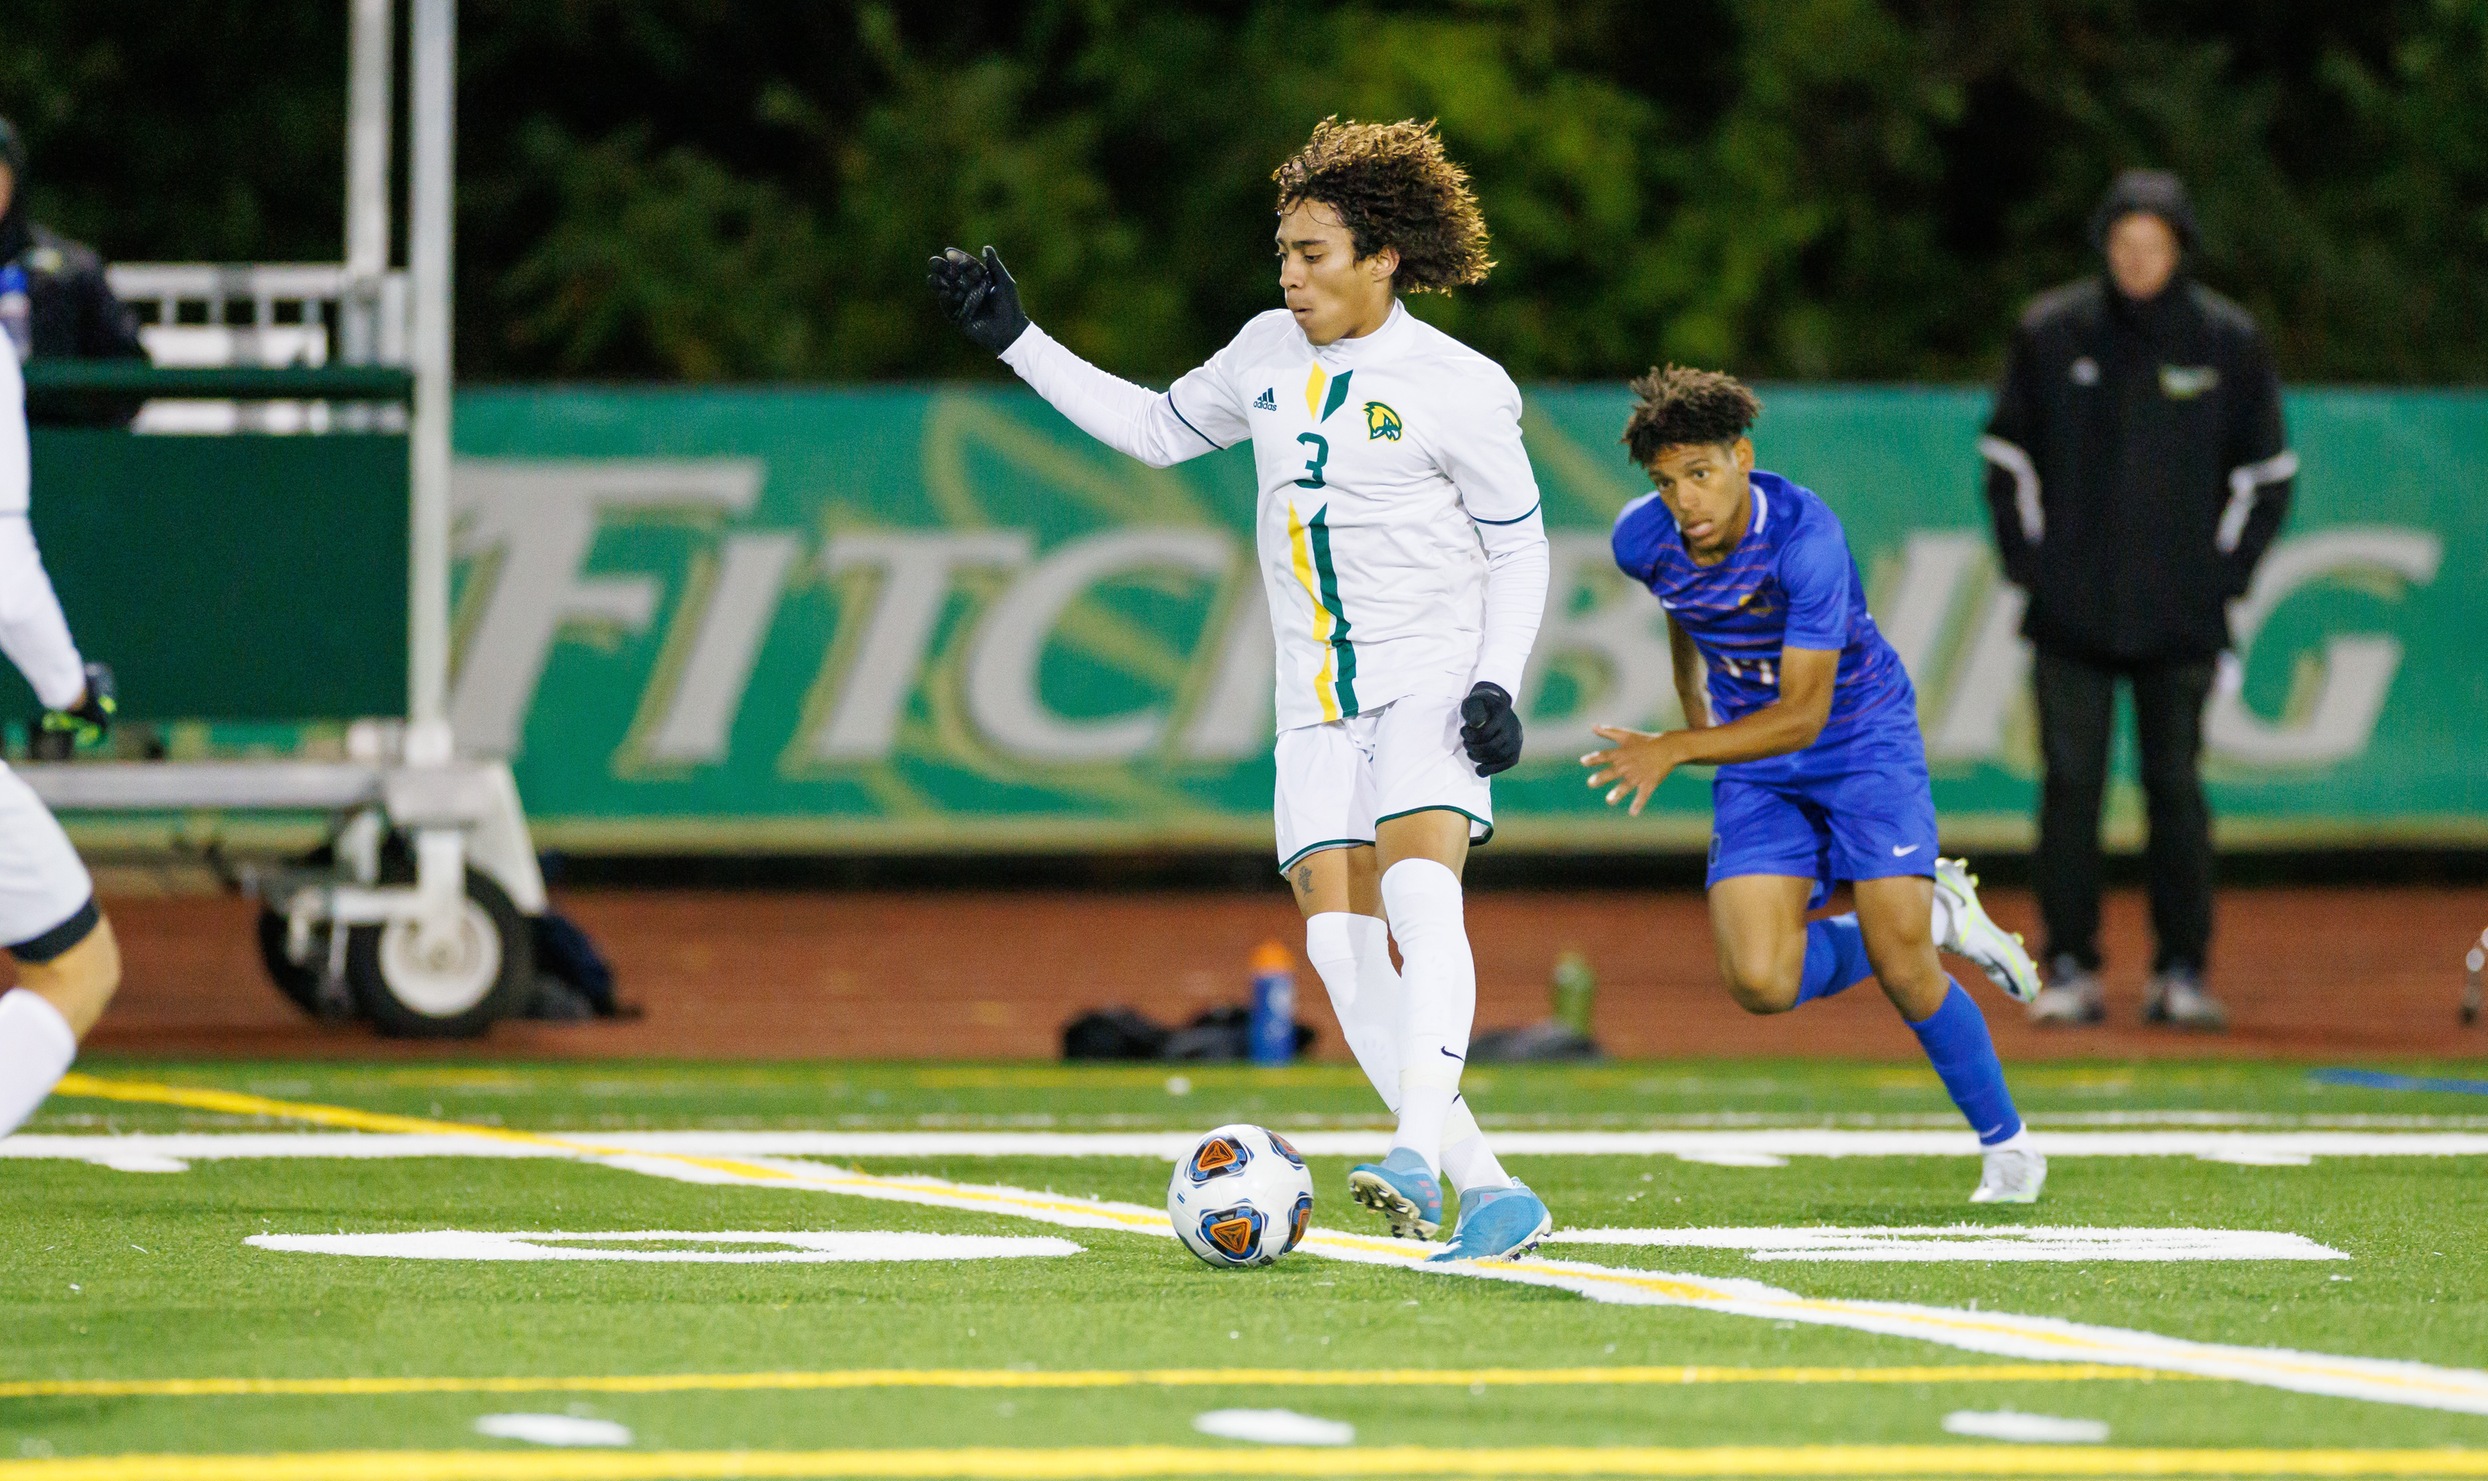 Falcons Blanked by Bears in MASCAC Soccer Action